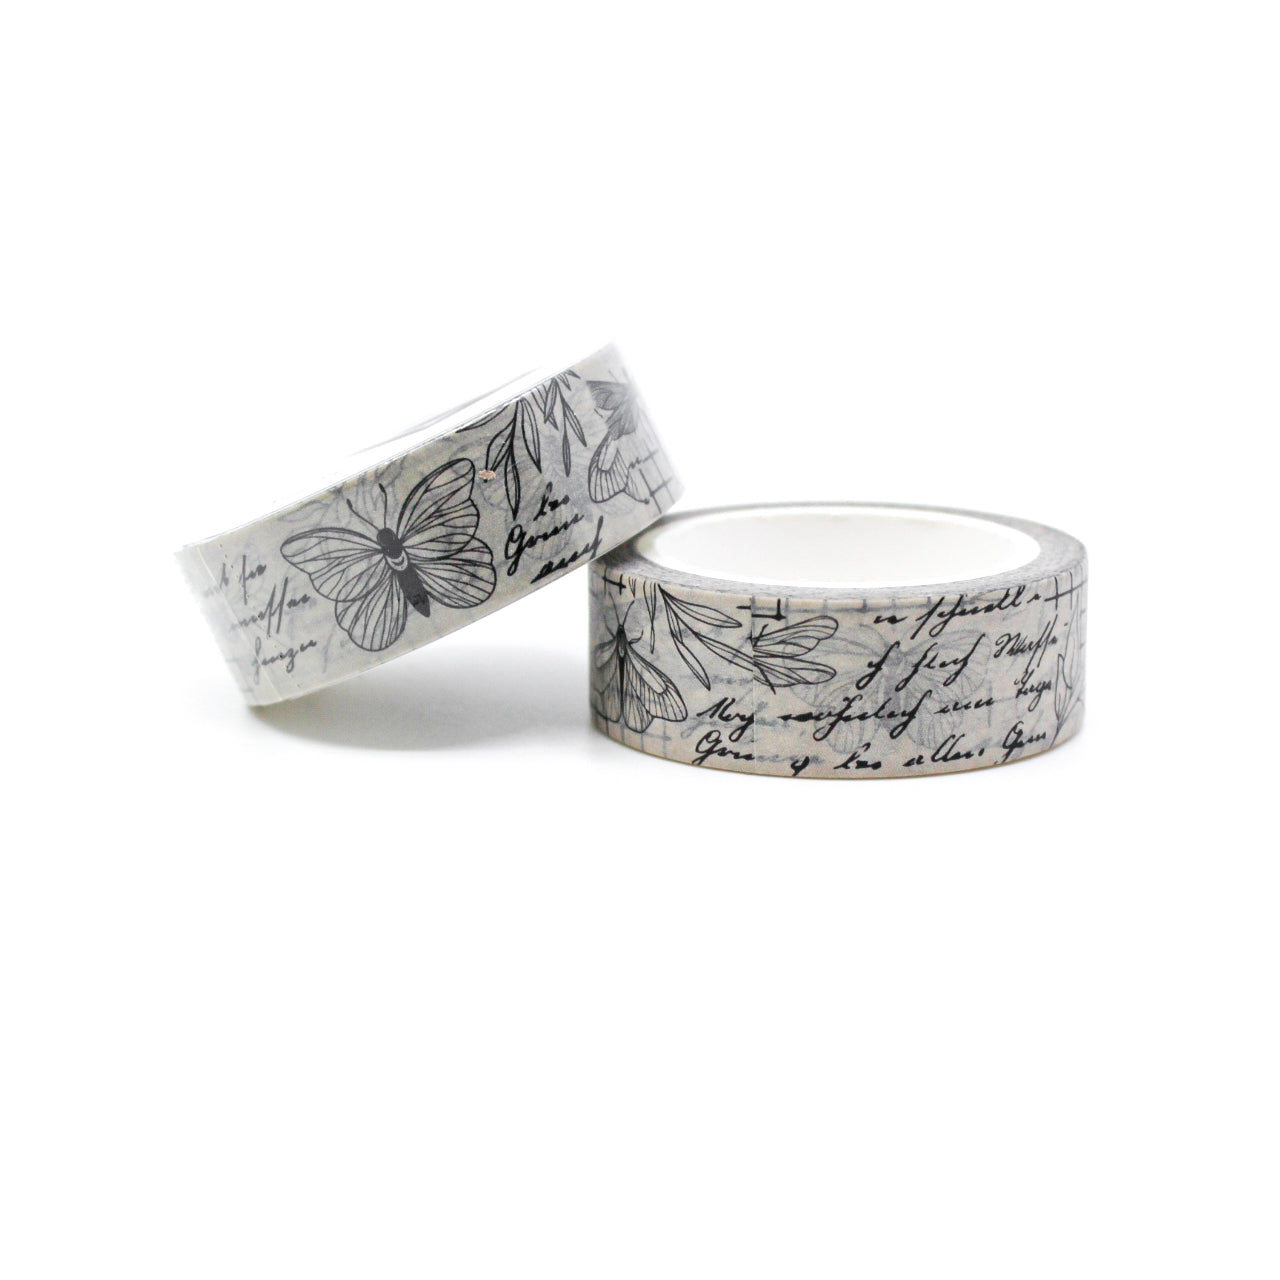  Let your imagination take flight as you adorn your creations with the graceful allure of butterflies and moths using our Black and Grey Vintage Botany Washi Tape. This washi tape features vintage-inspired botanical illustrations of butterflies and moths. This tape is sold at BBB Supplies Craft Shop.